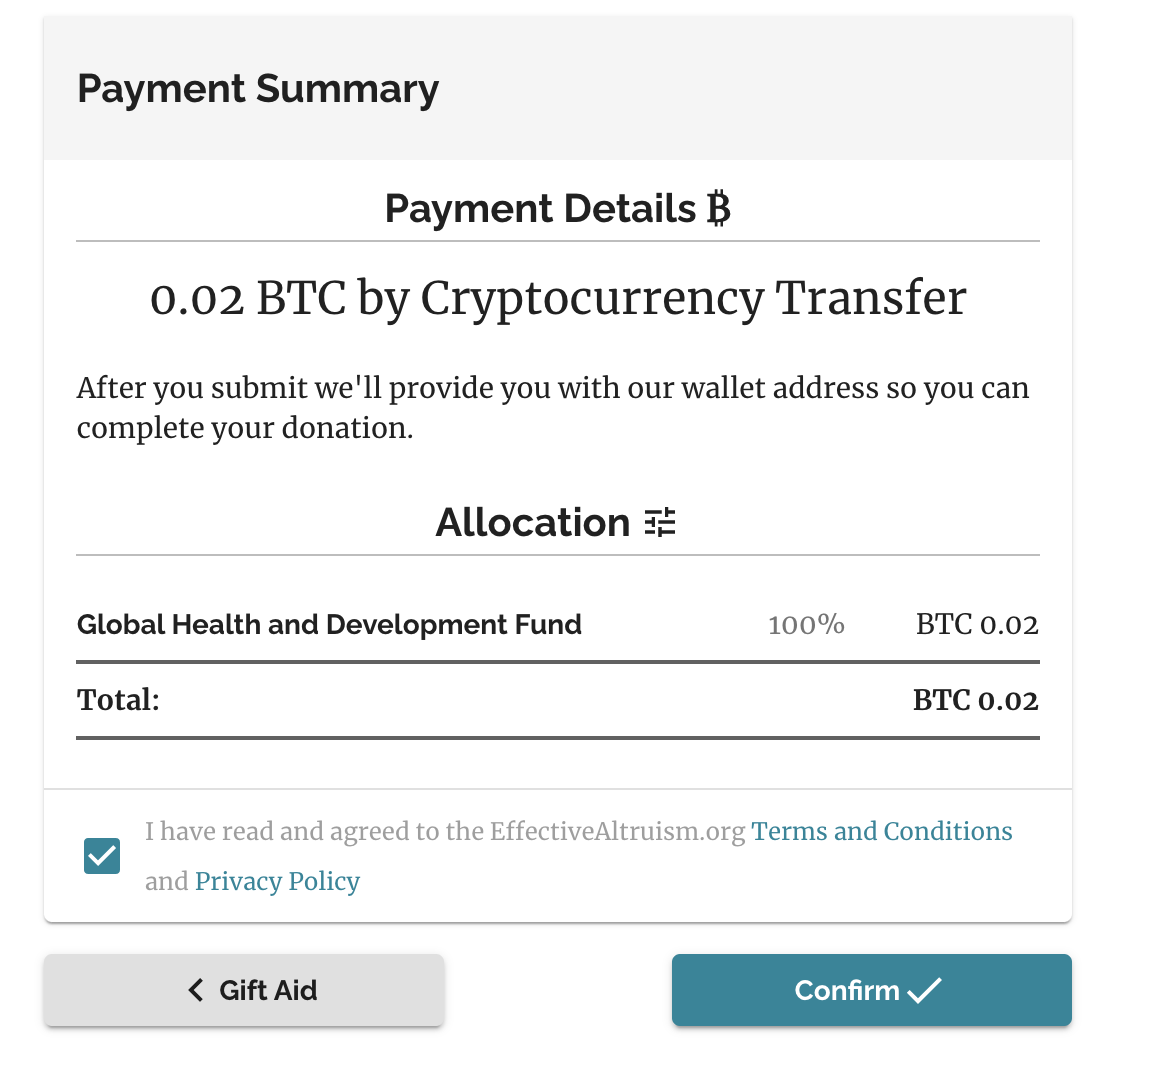 Crypto Donation Flow - Payment Summary Page